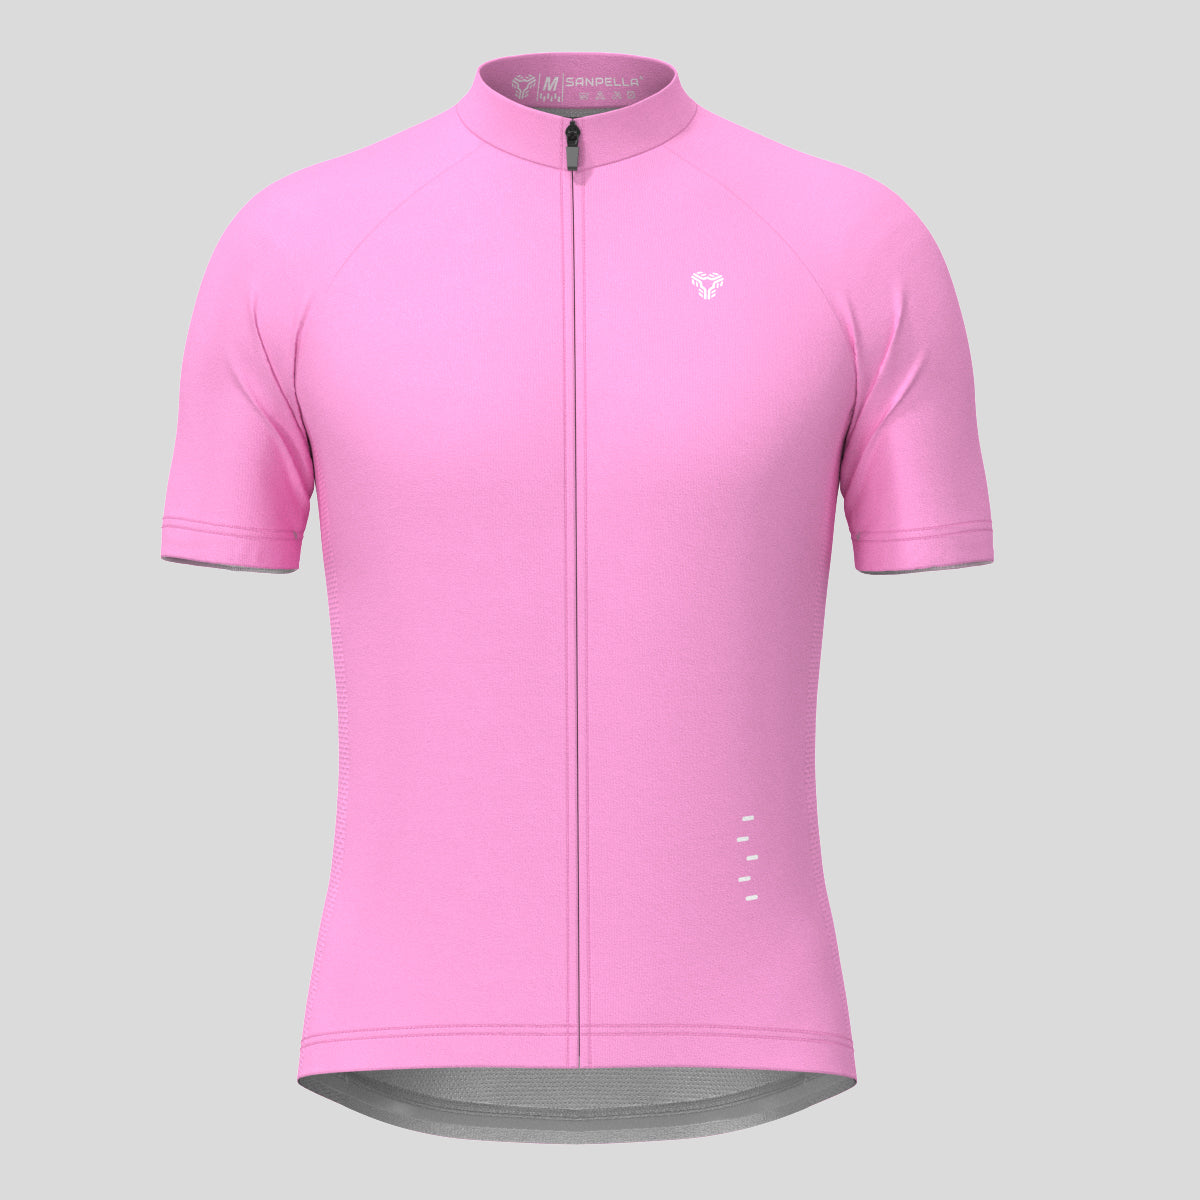 Men's Minimal Solid Cycling Jersey -Neo Pink